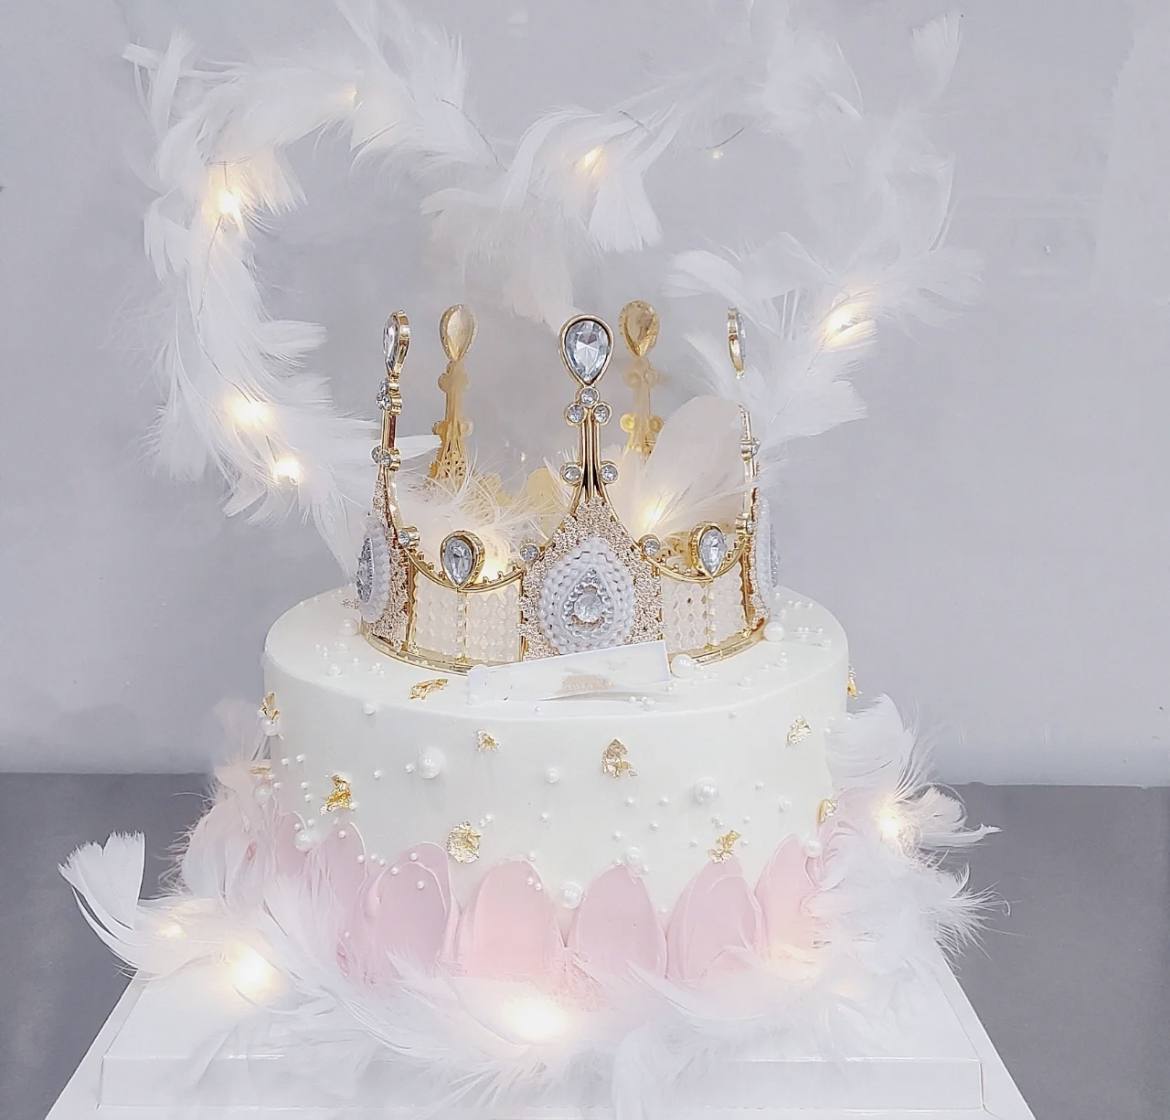 Festive Supplies Gold Happy Birthday Cake Topper Metal Crown Pearl Wedding  Champagne Cupcakes For Kids Girls Party Decorations From Doujiangne, $7.96  | DHgate.Com